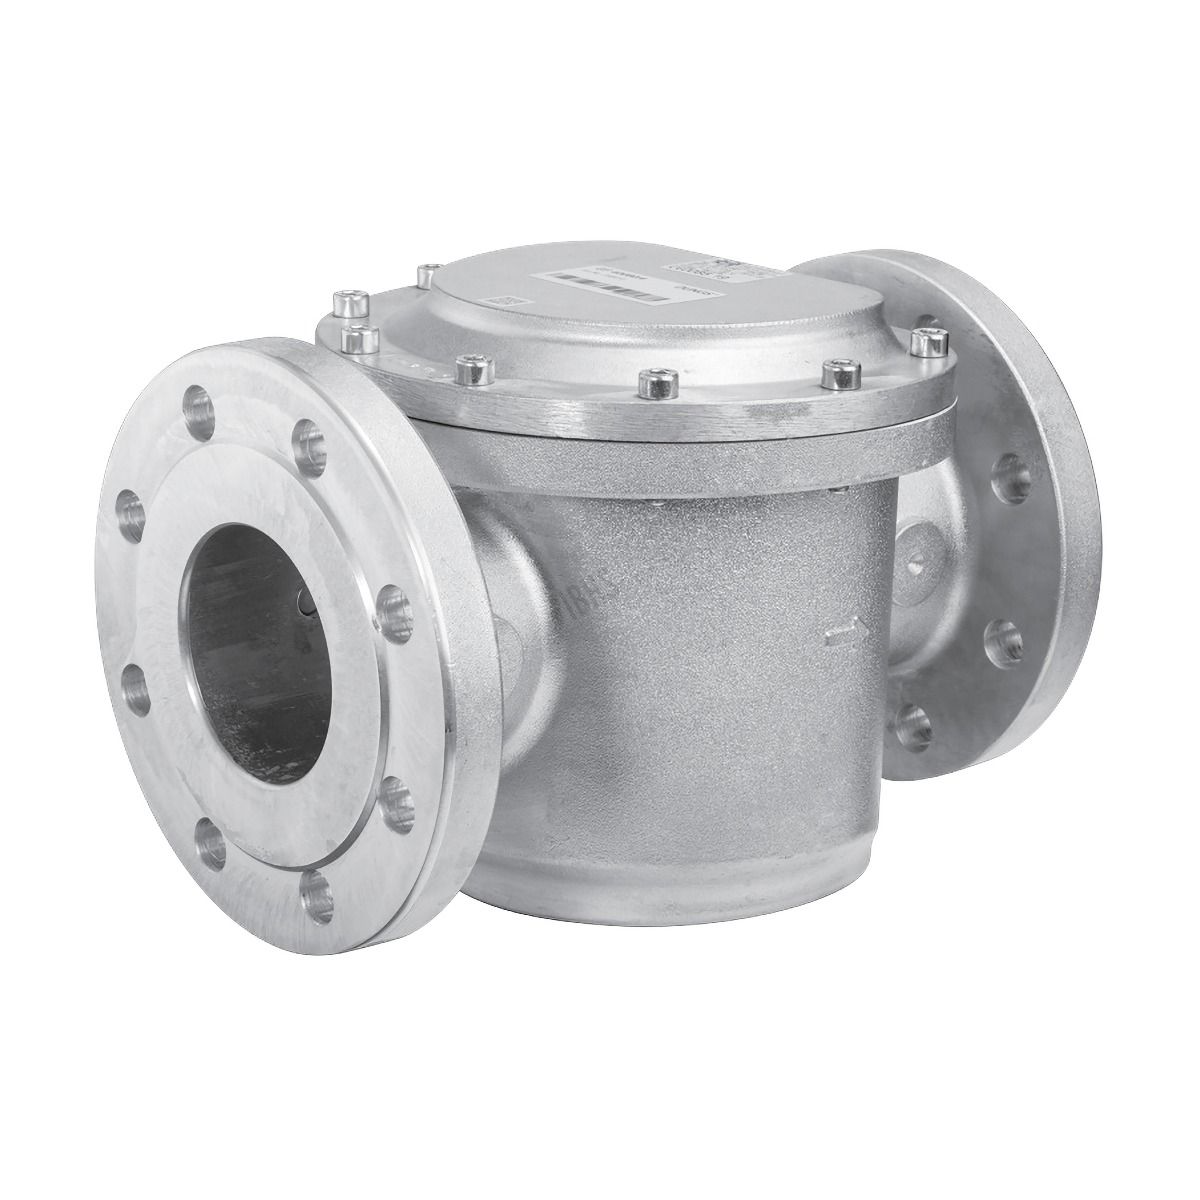 200mm Flanged PN16 Gas Filter 6 Bar Max Operating Pressure